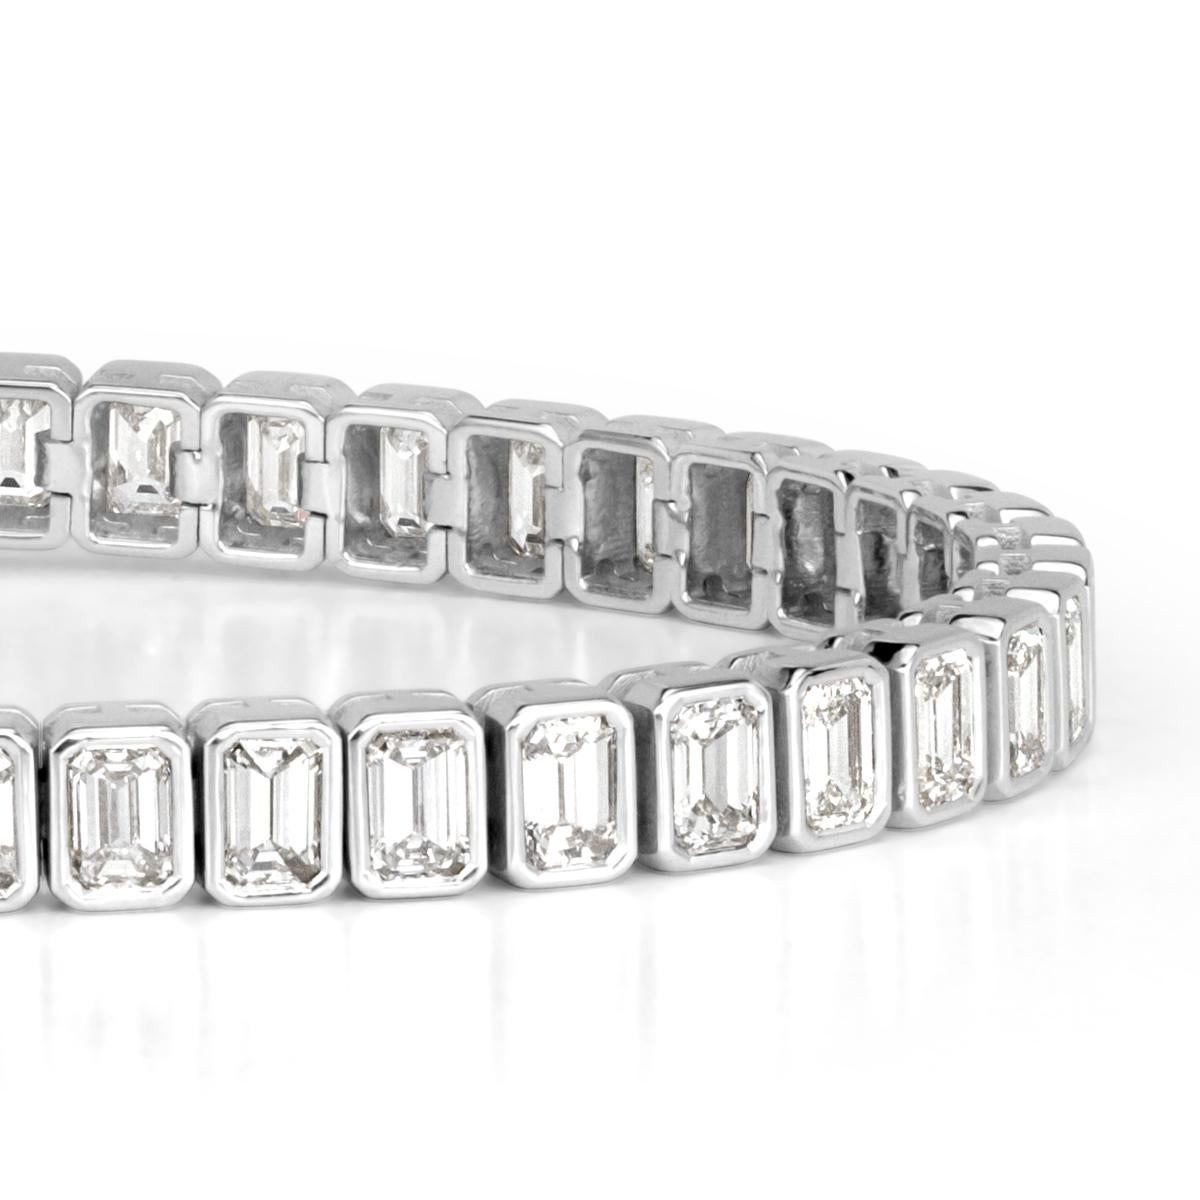 Created in a sleek 18k white gold setting, this sumptuous diamond tennis bracelet showcases 8,80ct of emerald cut diamonds matched and bezel set to perfection. The diamonds are graded at top qualities of G-H in color and VS1-VS2 in clarity.